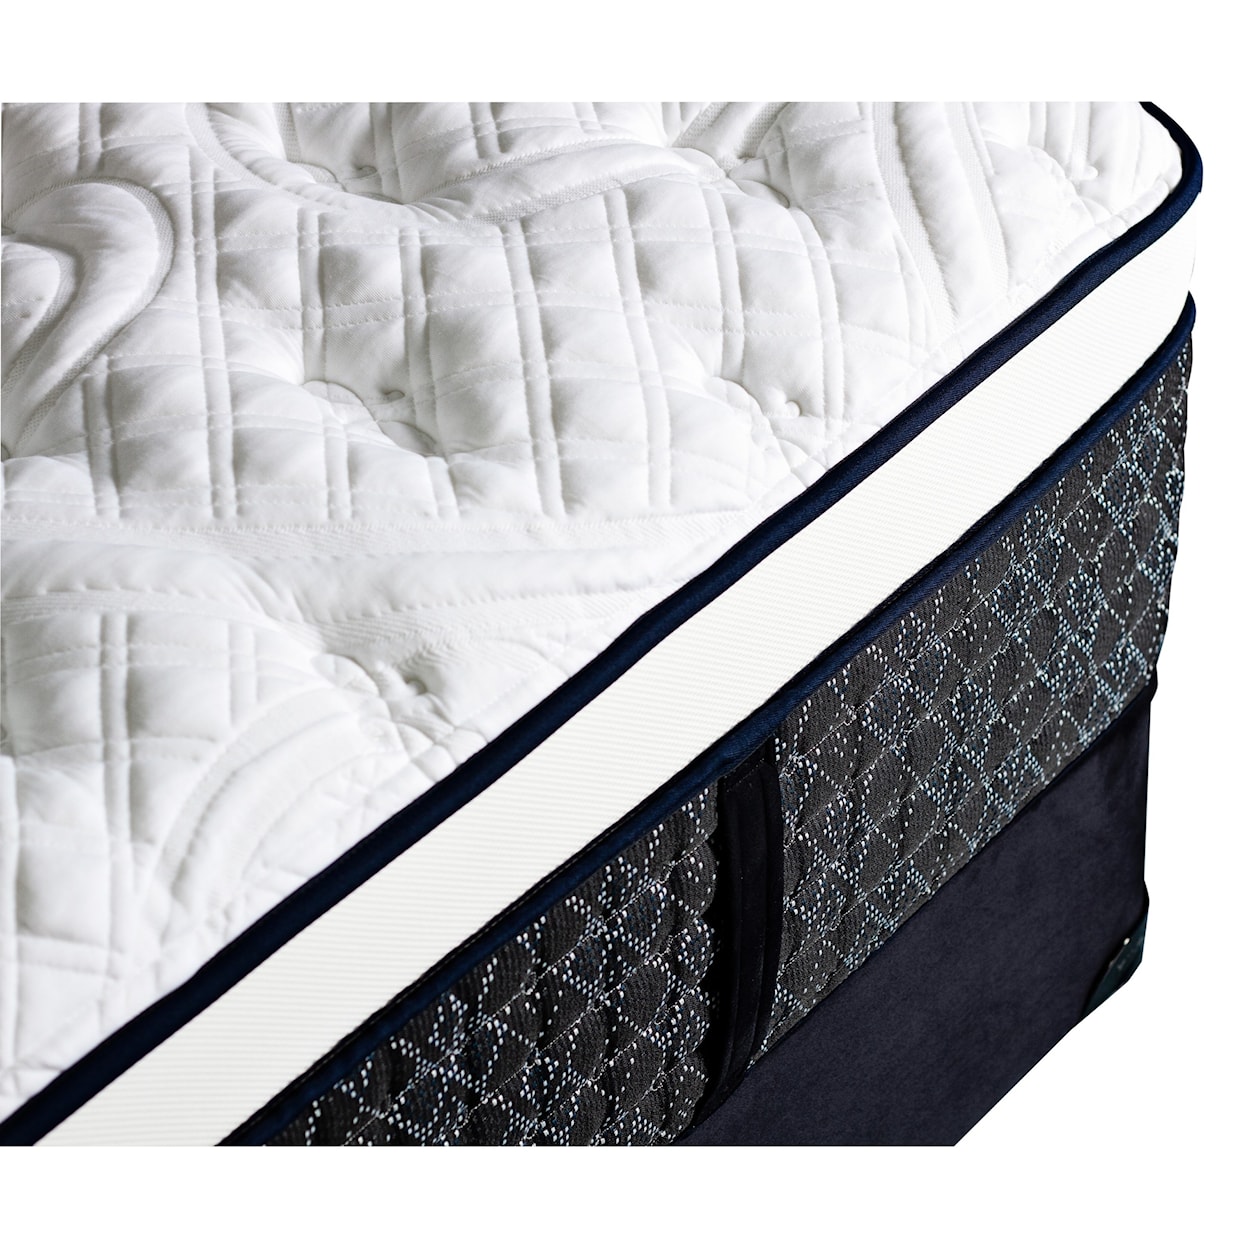 Kingsdown Sleep to Live 9000 Gold Blue ET Queen Pocketed Coil Mattress LoPro Set